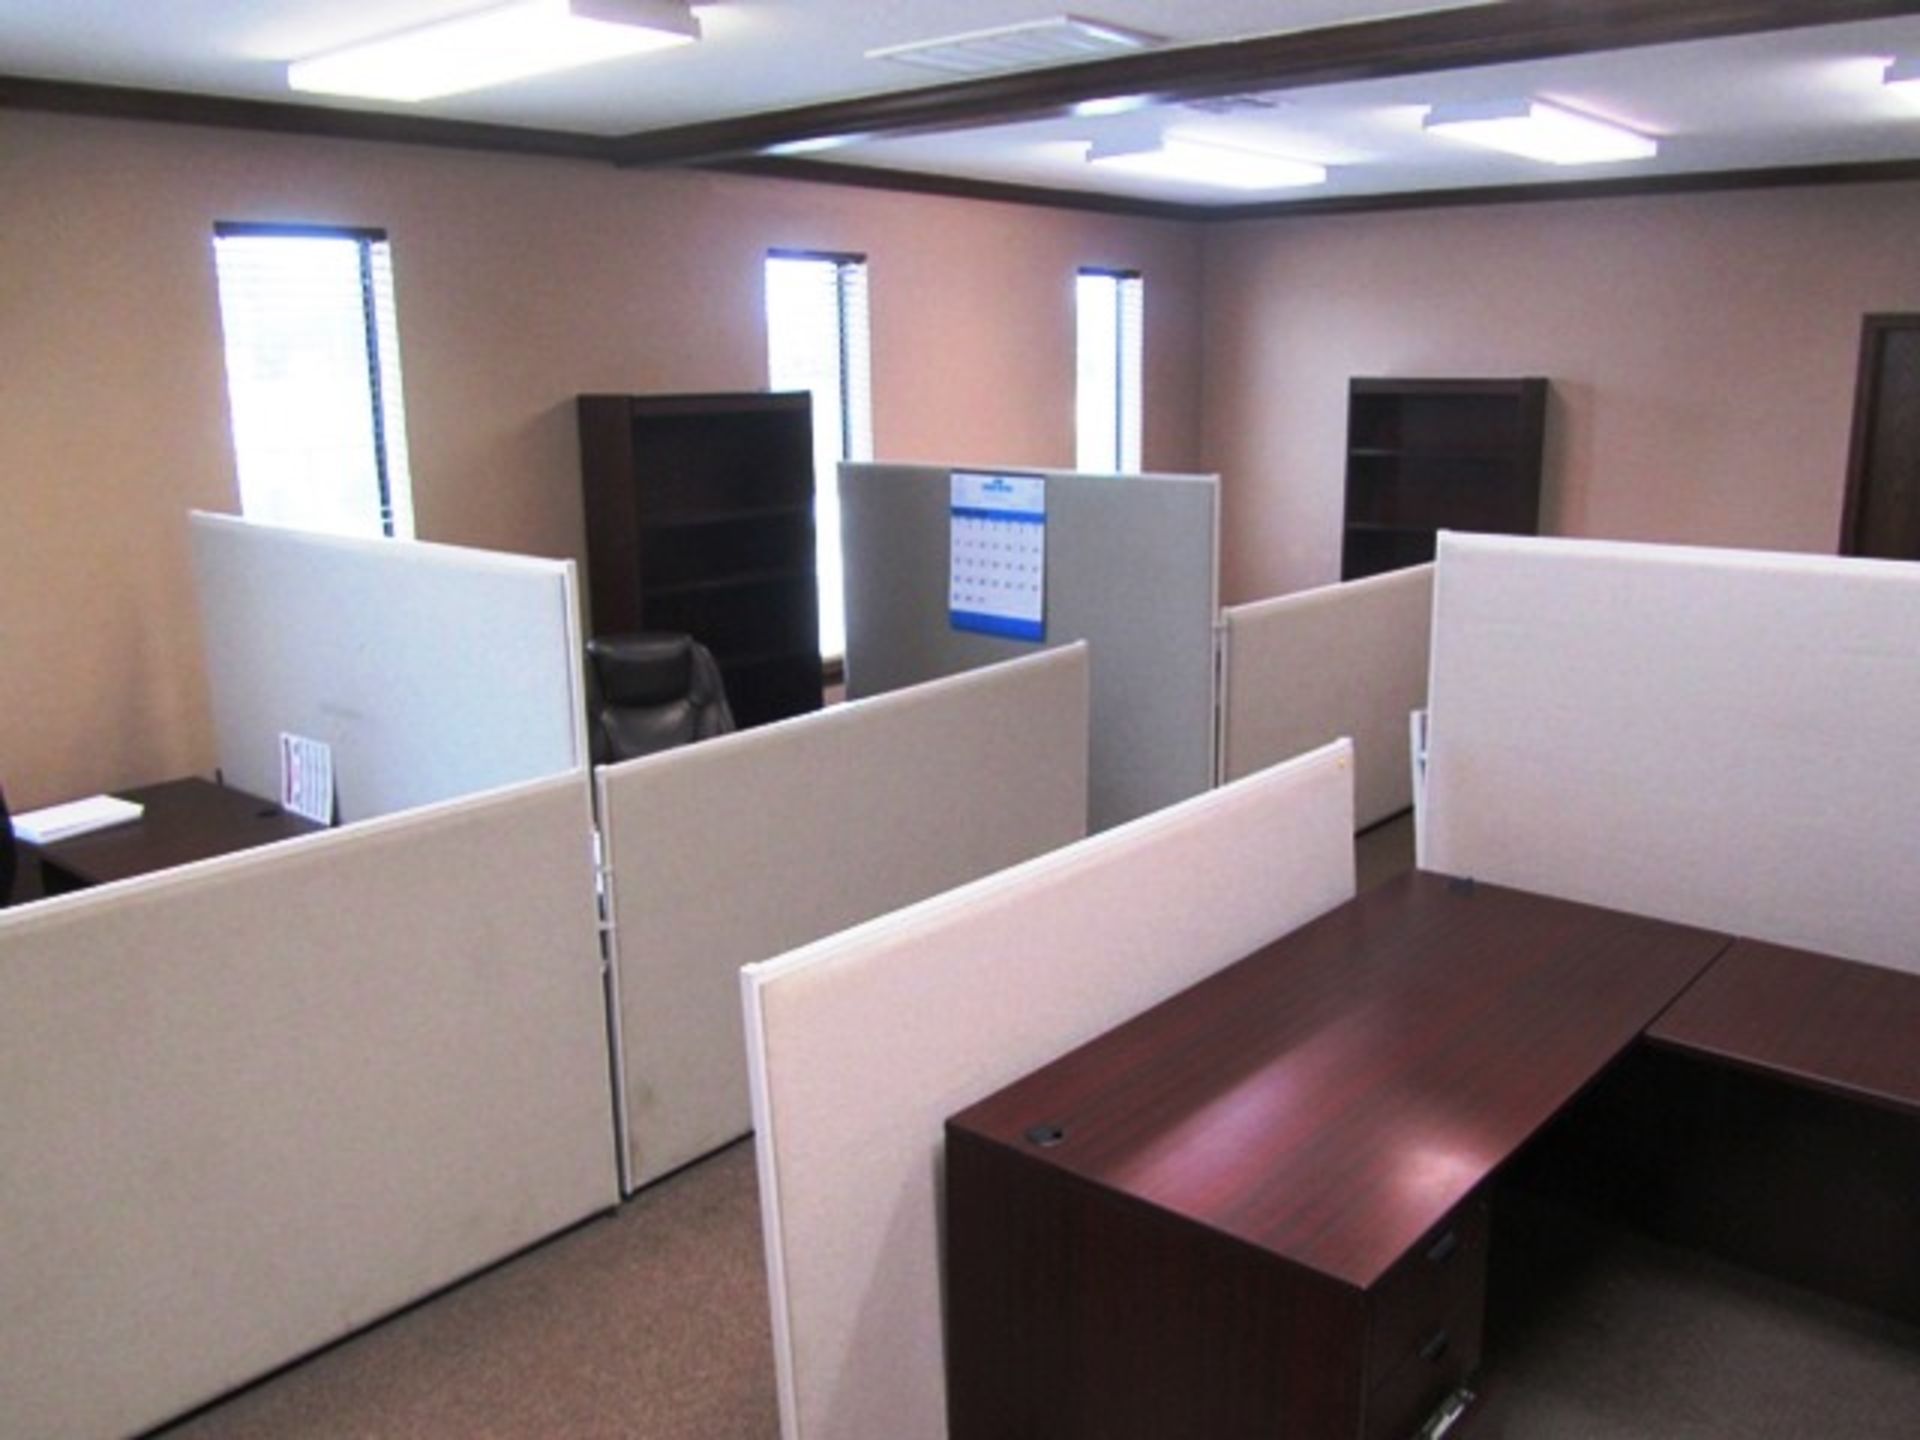 Contents of Office consisting of (4) Desks, Chairs, Bookshelf, Partitions